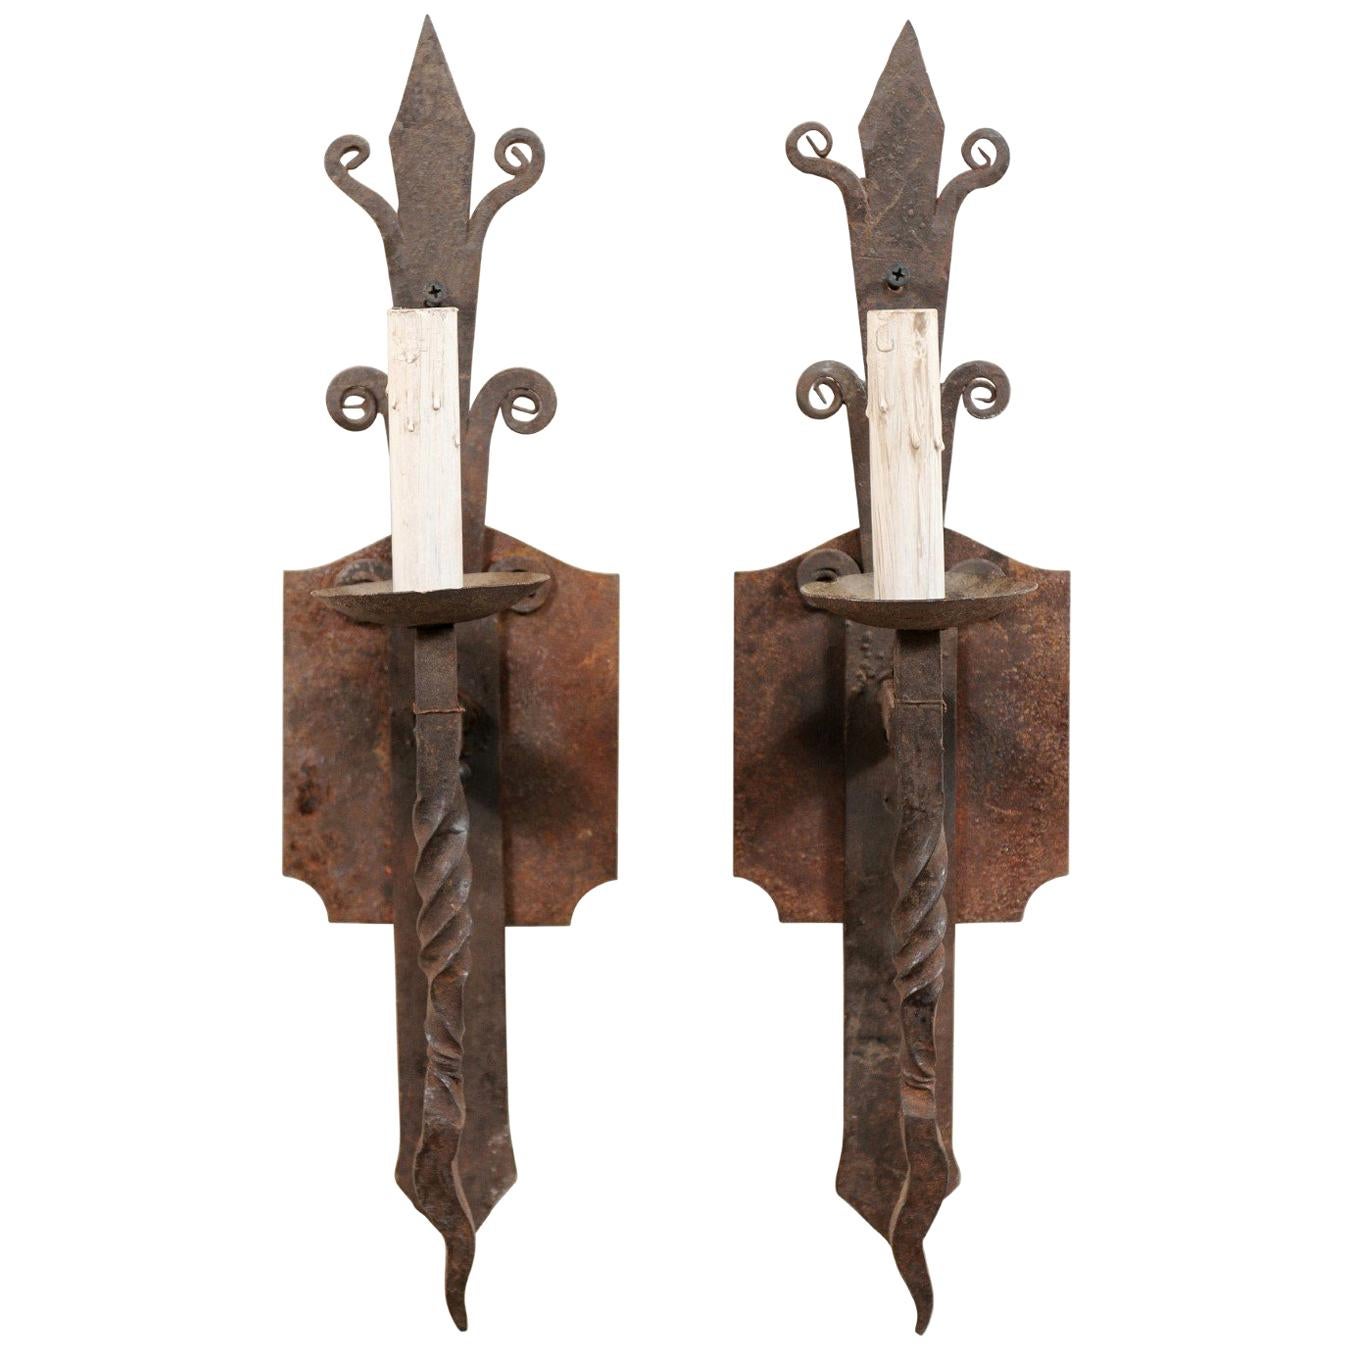 Pair of French Single-Light Iron Sconces from the Mid-20th Century